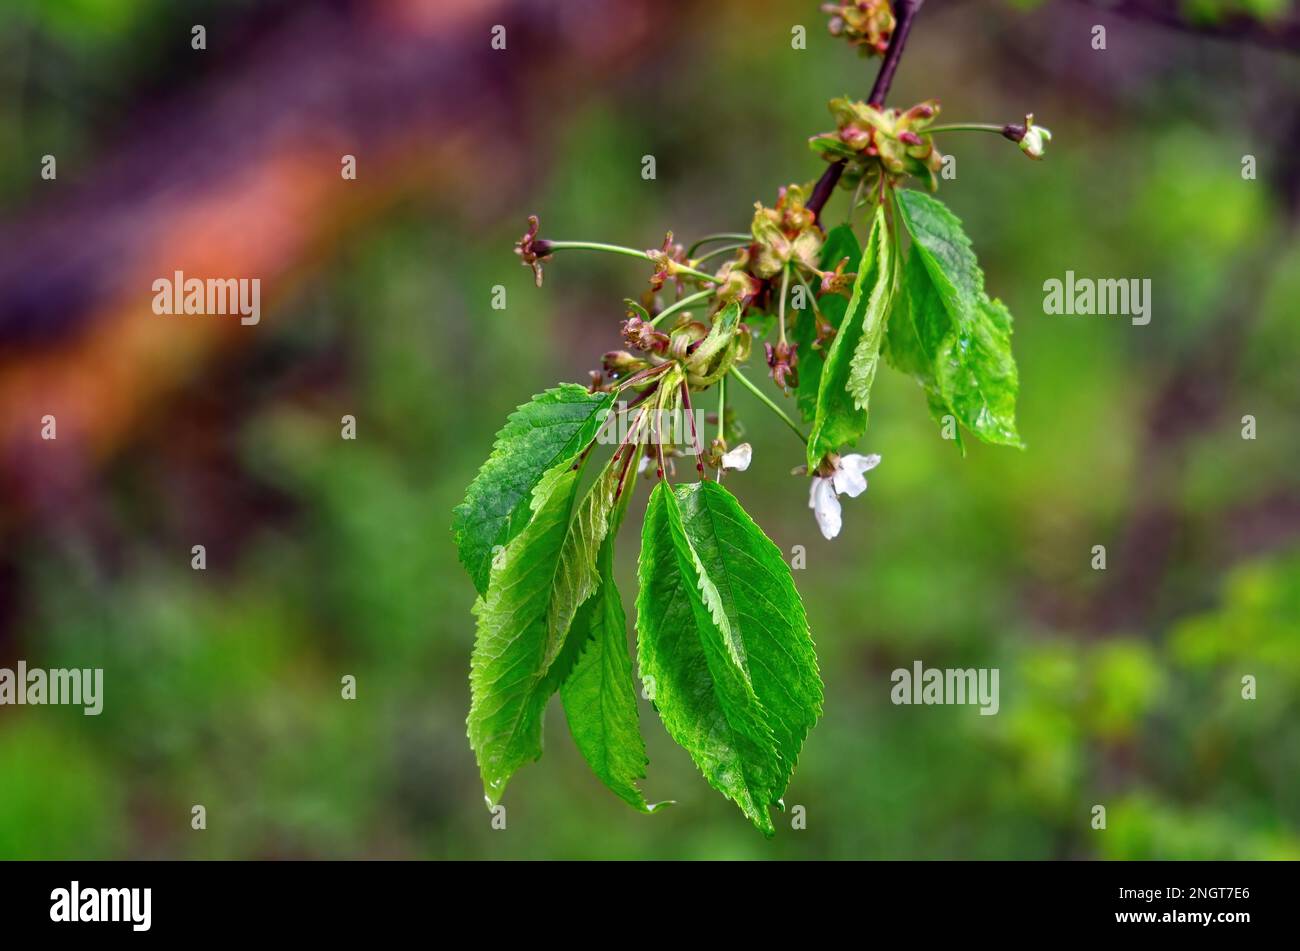 young leaves on a branch after the rain, close-up Stock Photo